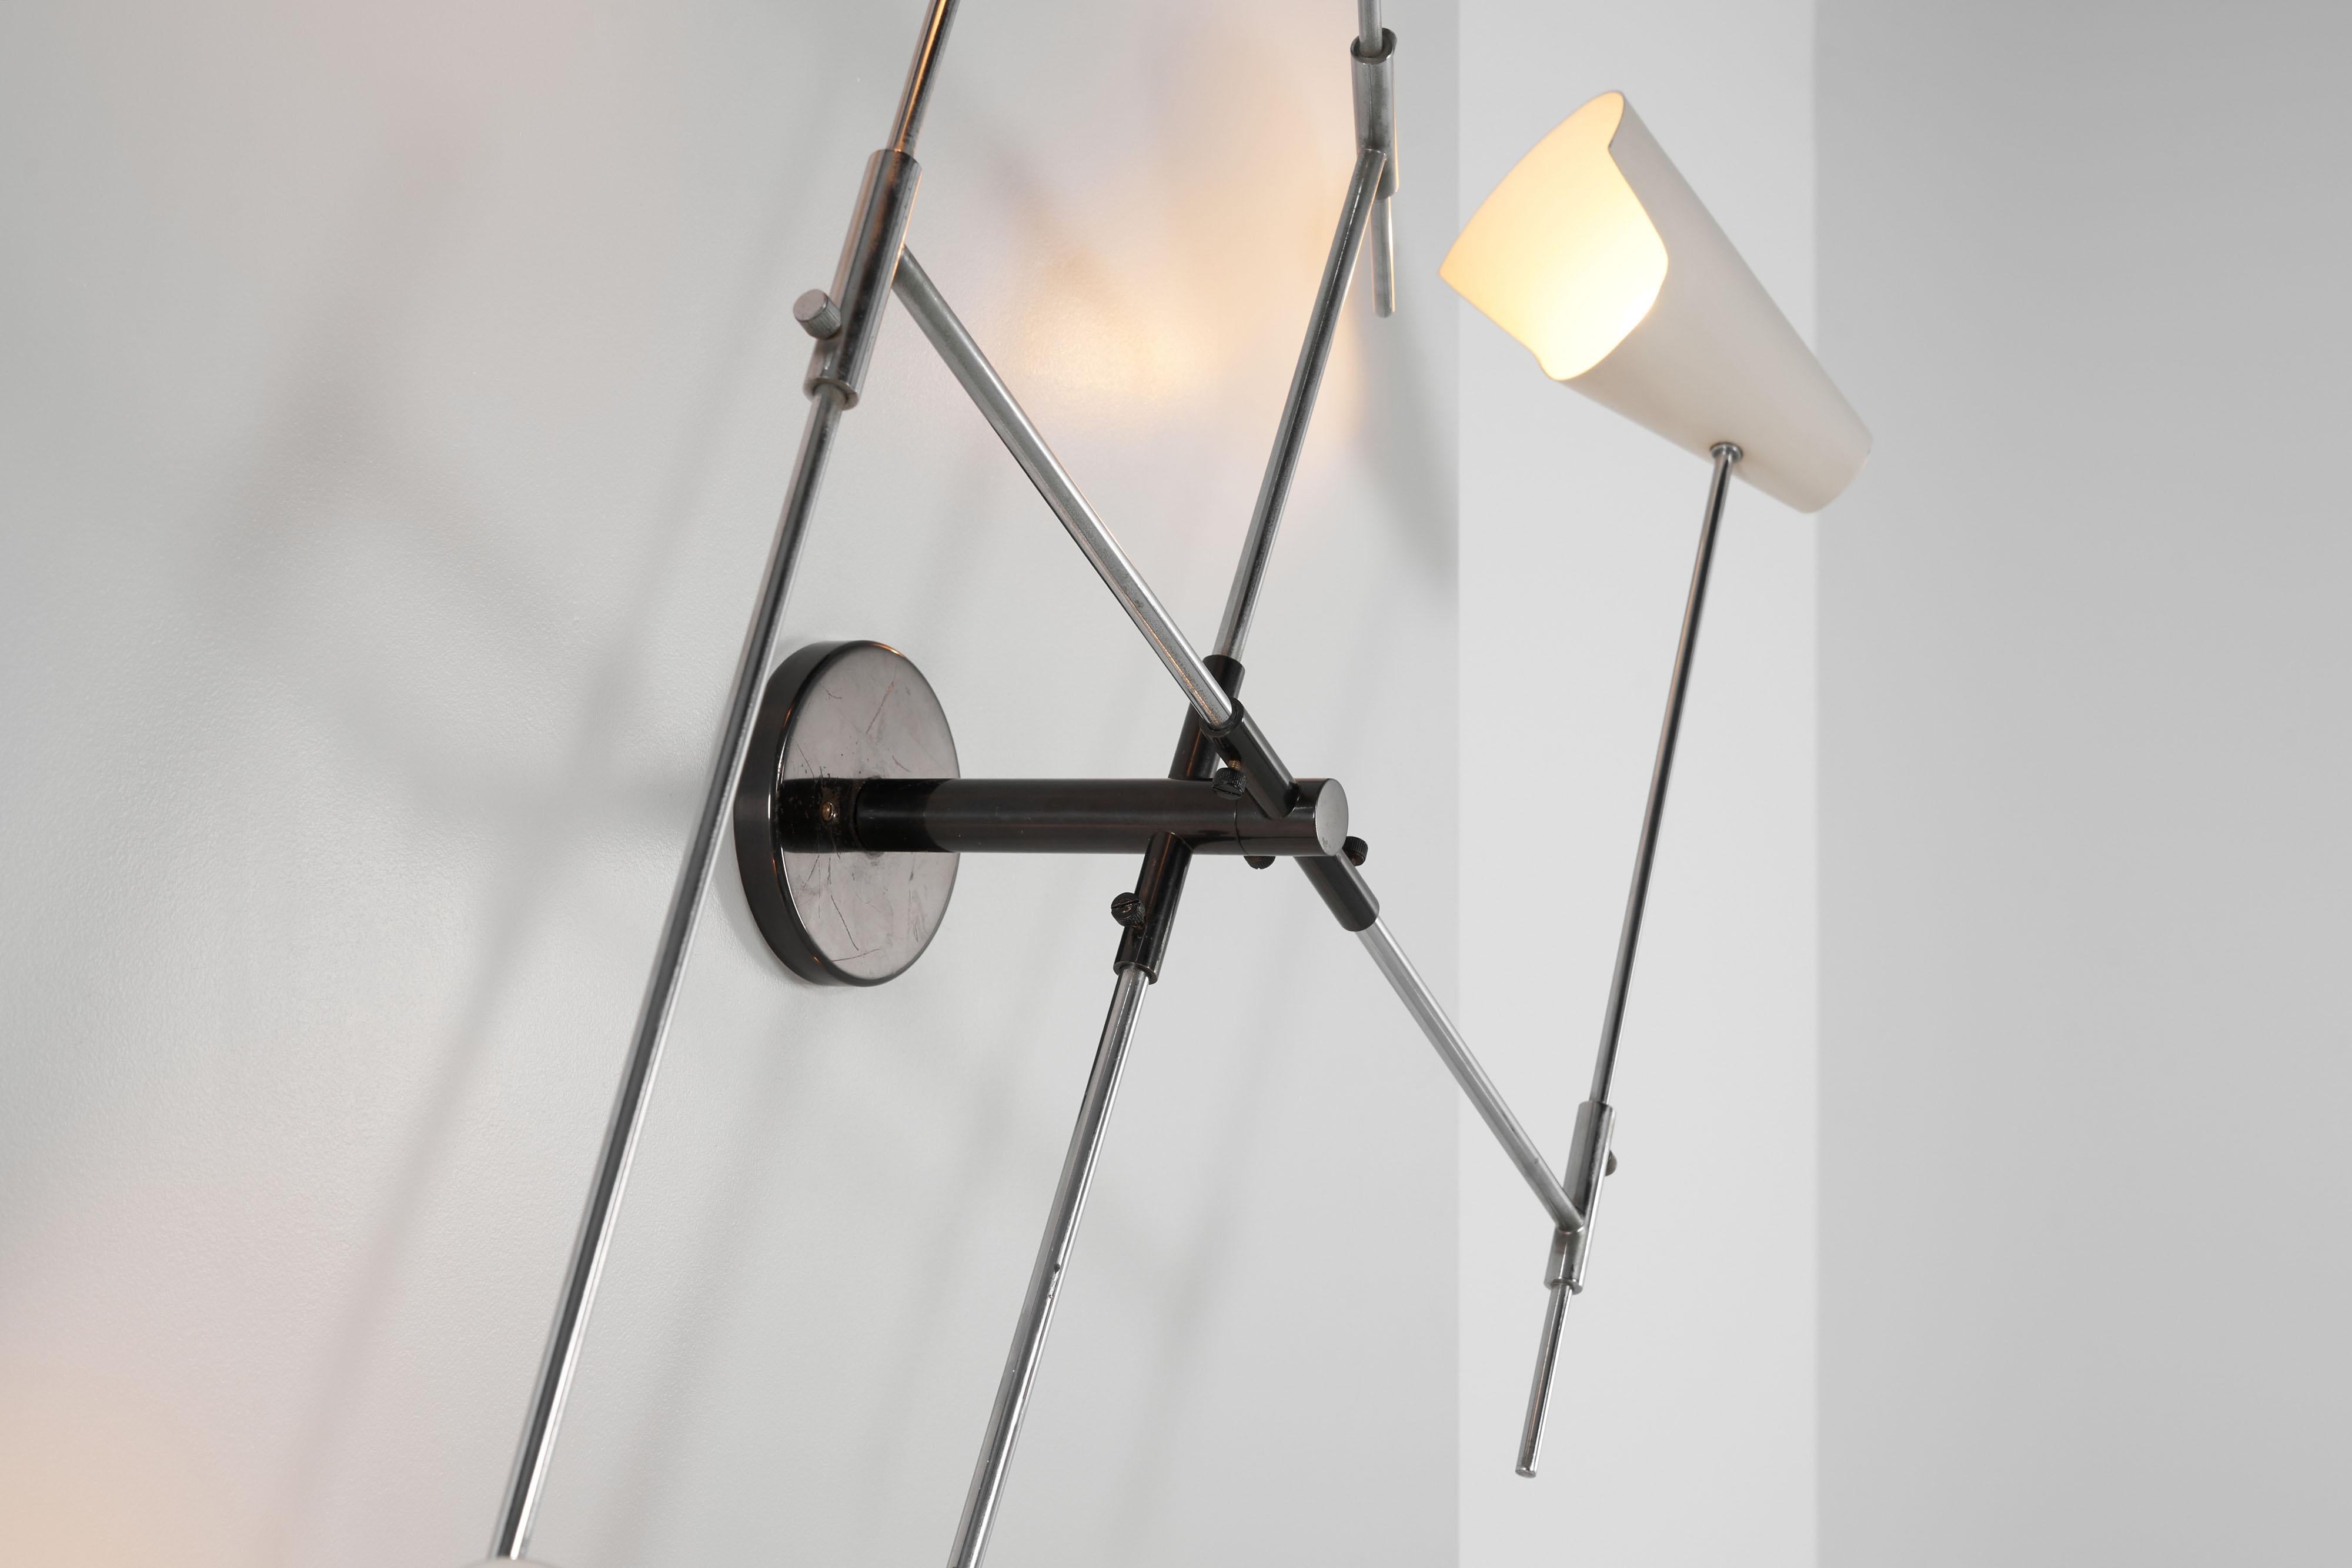 Impressive wall lamp model 169/4 designed by Gino Sarfatti and manufactured by Arteluce, Italy 1952. This large sized wall lamp comes from a series of wall lamps designed by Gino Sarfatti in 1952, this is the model with 4 arms is an impressive